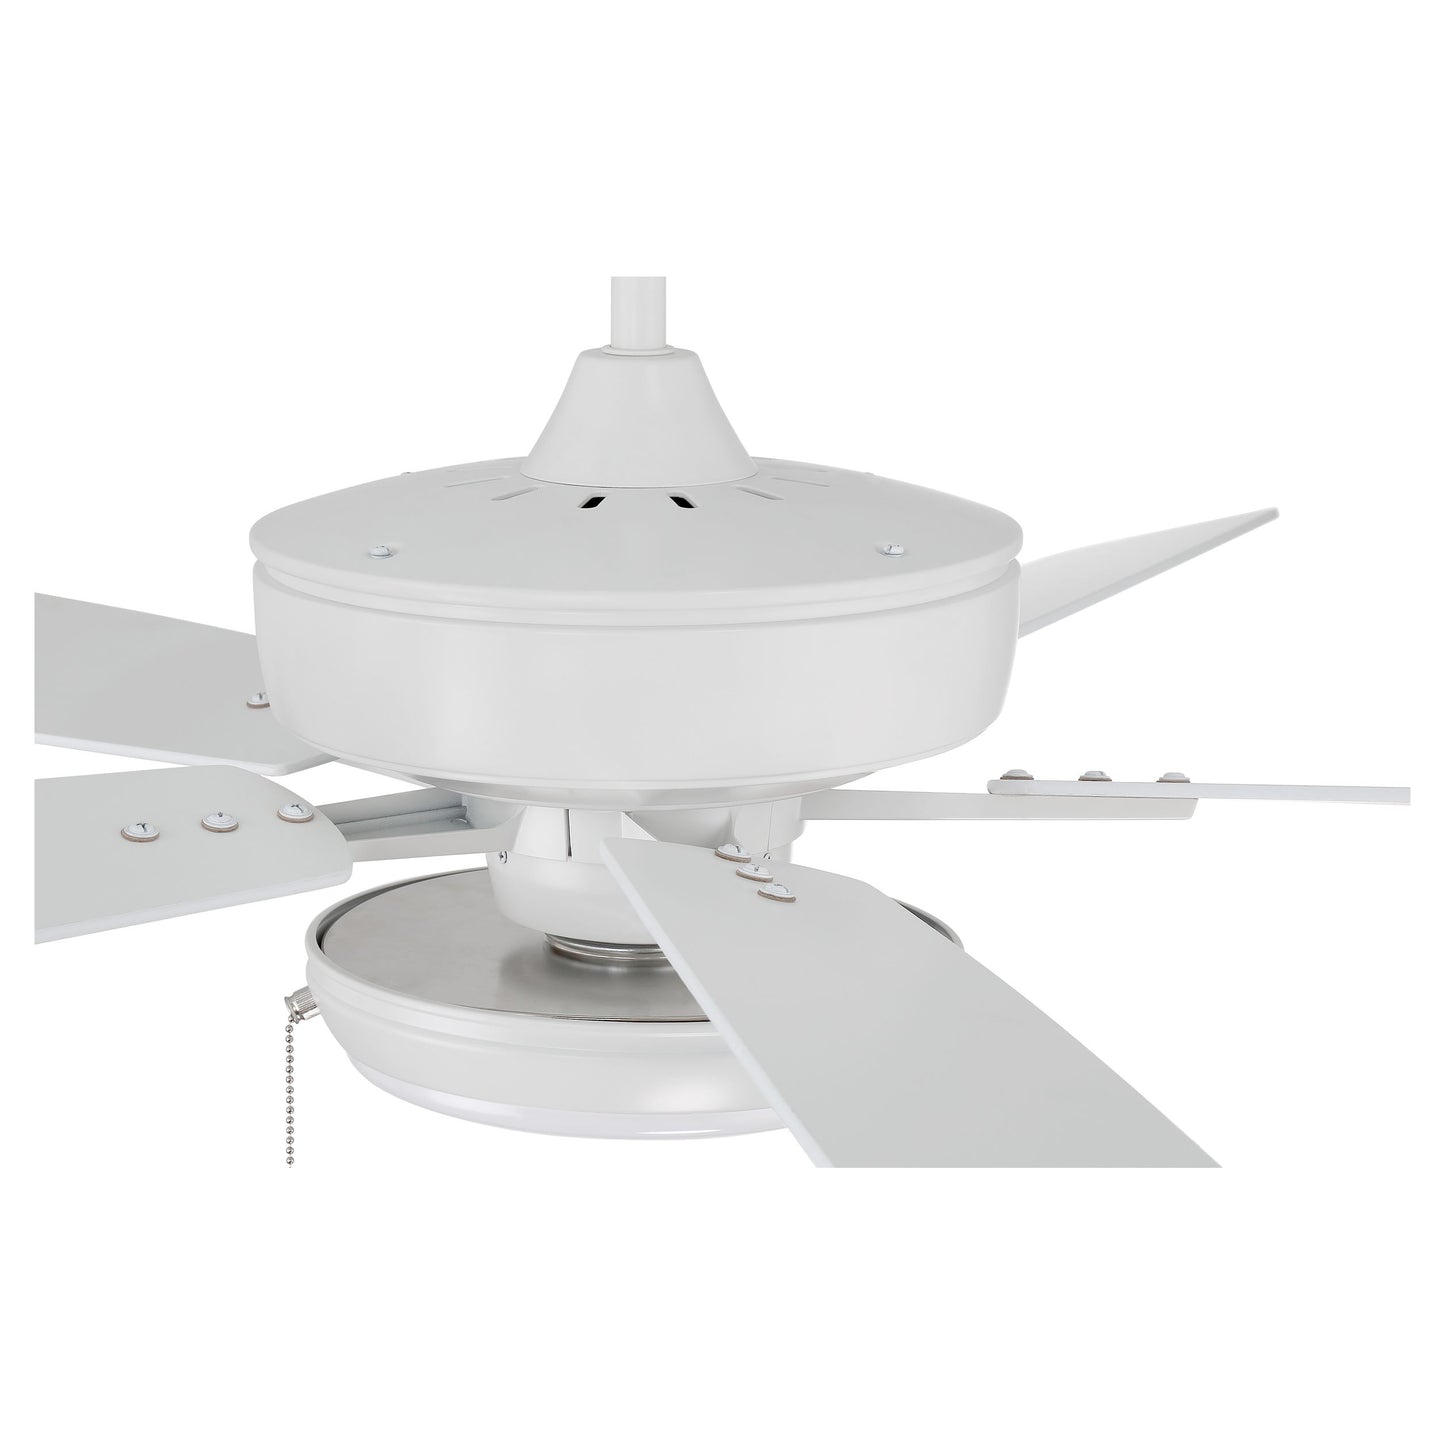 S119W5-60WWOK - Super Pro 119 60" 5 Blade Ceiling Fan with Light Kit - Pull Chain - White